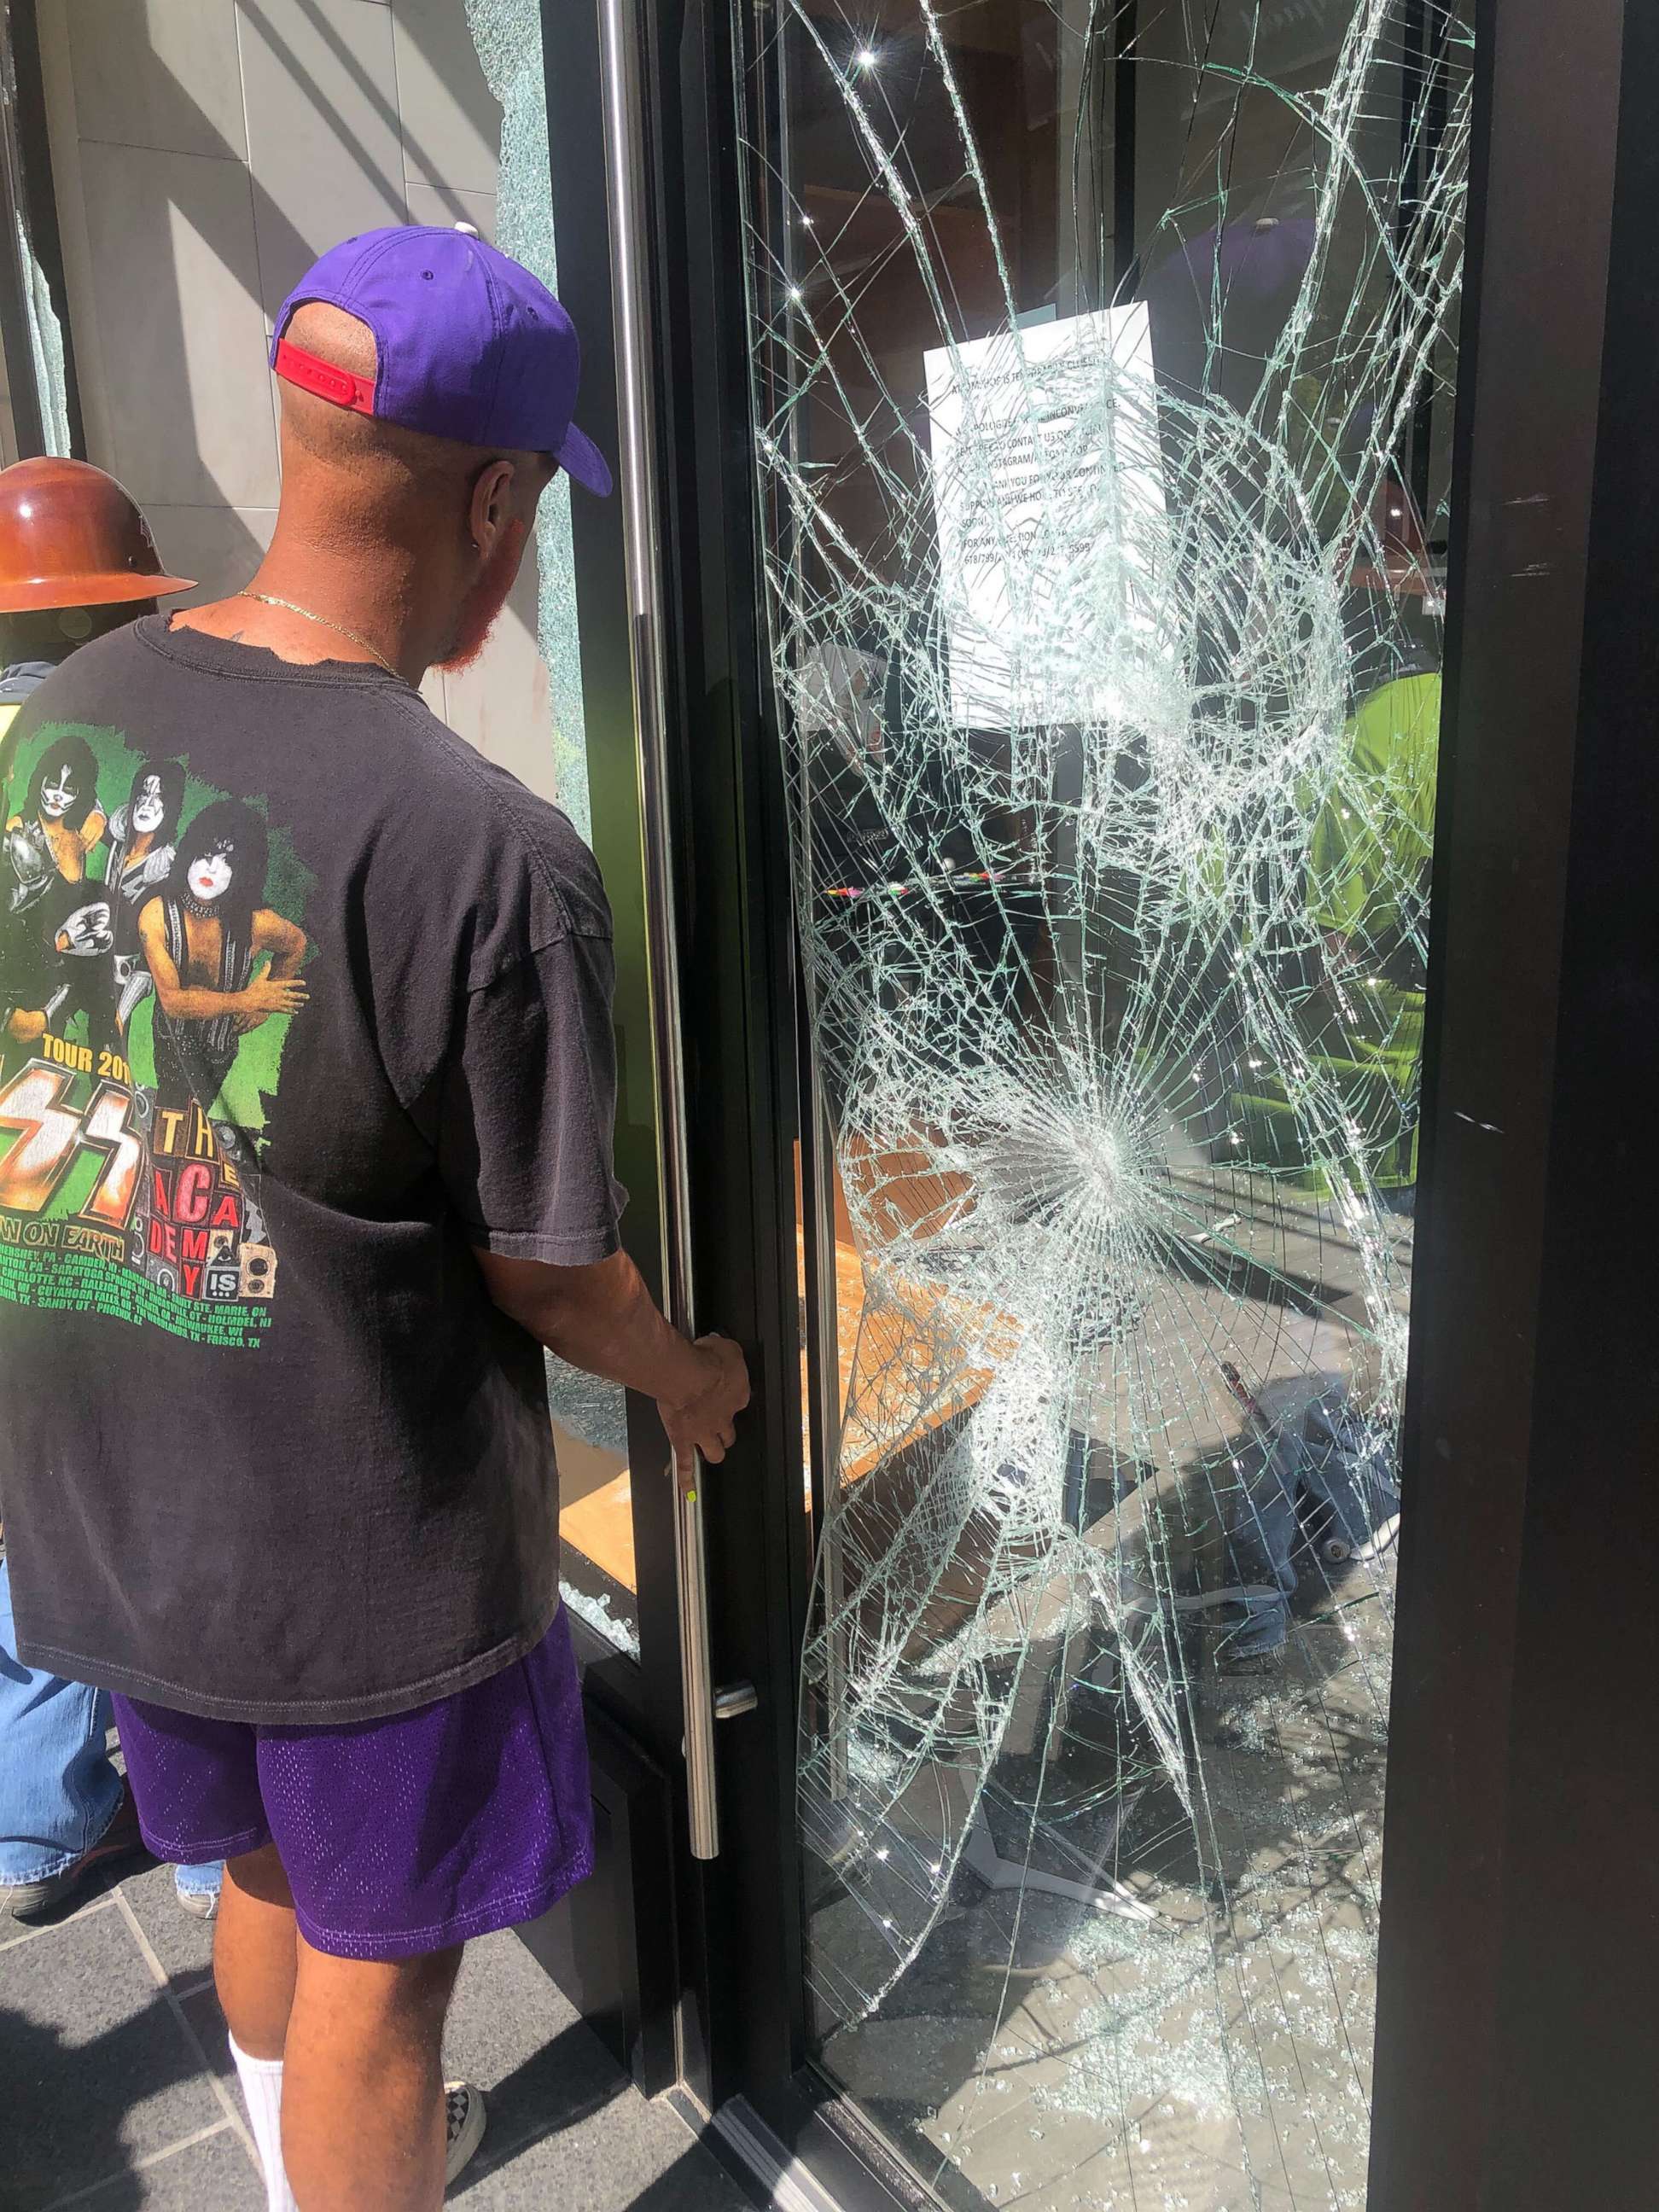 PHOTO: The black-owned Attom Shop in Atlanta was looted during protests on May, 29, 2020.